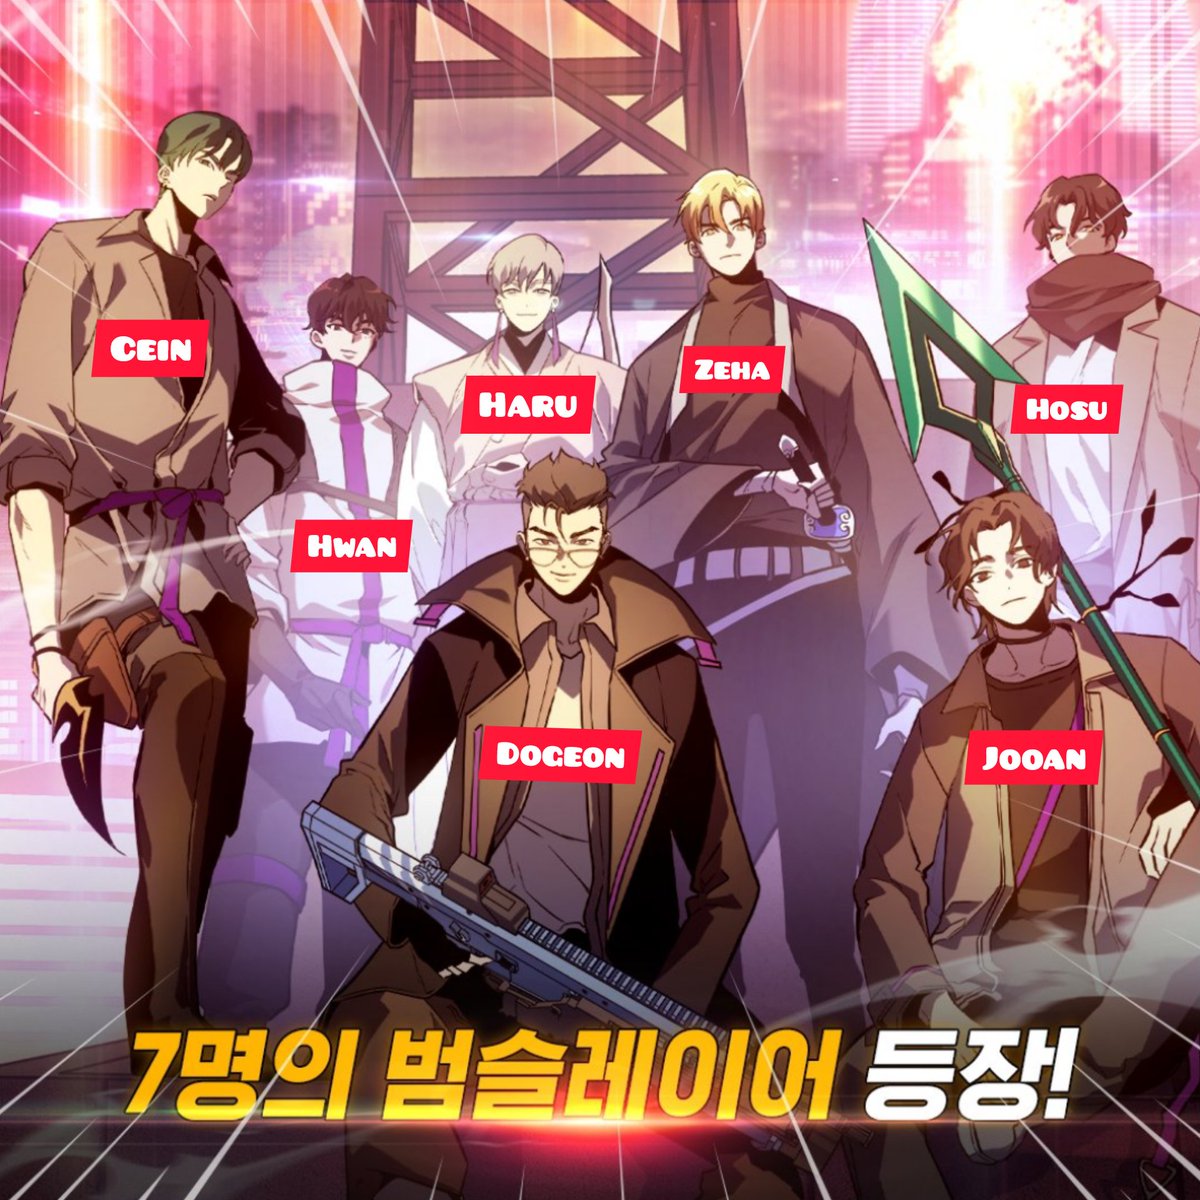 Each character weapon's color in #CHAKHO matches with each member's mic color:

#ZEHA_JUNGKOOK Purple
#DOGEON_RM Blue
#JOOAN_V Green
#HOSU_jhope Red
#HWAN_Jin White/Silver
#CEIN_SUGA Black
#HARU_Jimin 's aura Yellow/Golden

#7FATES_CHAKHO